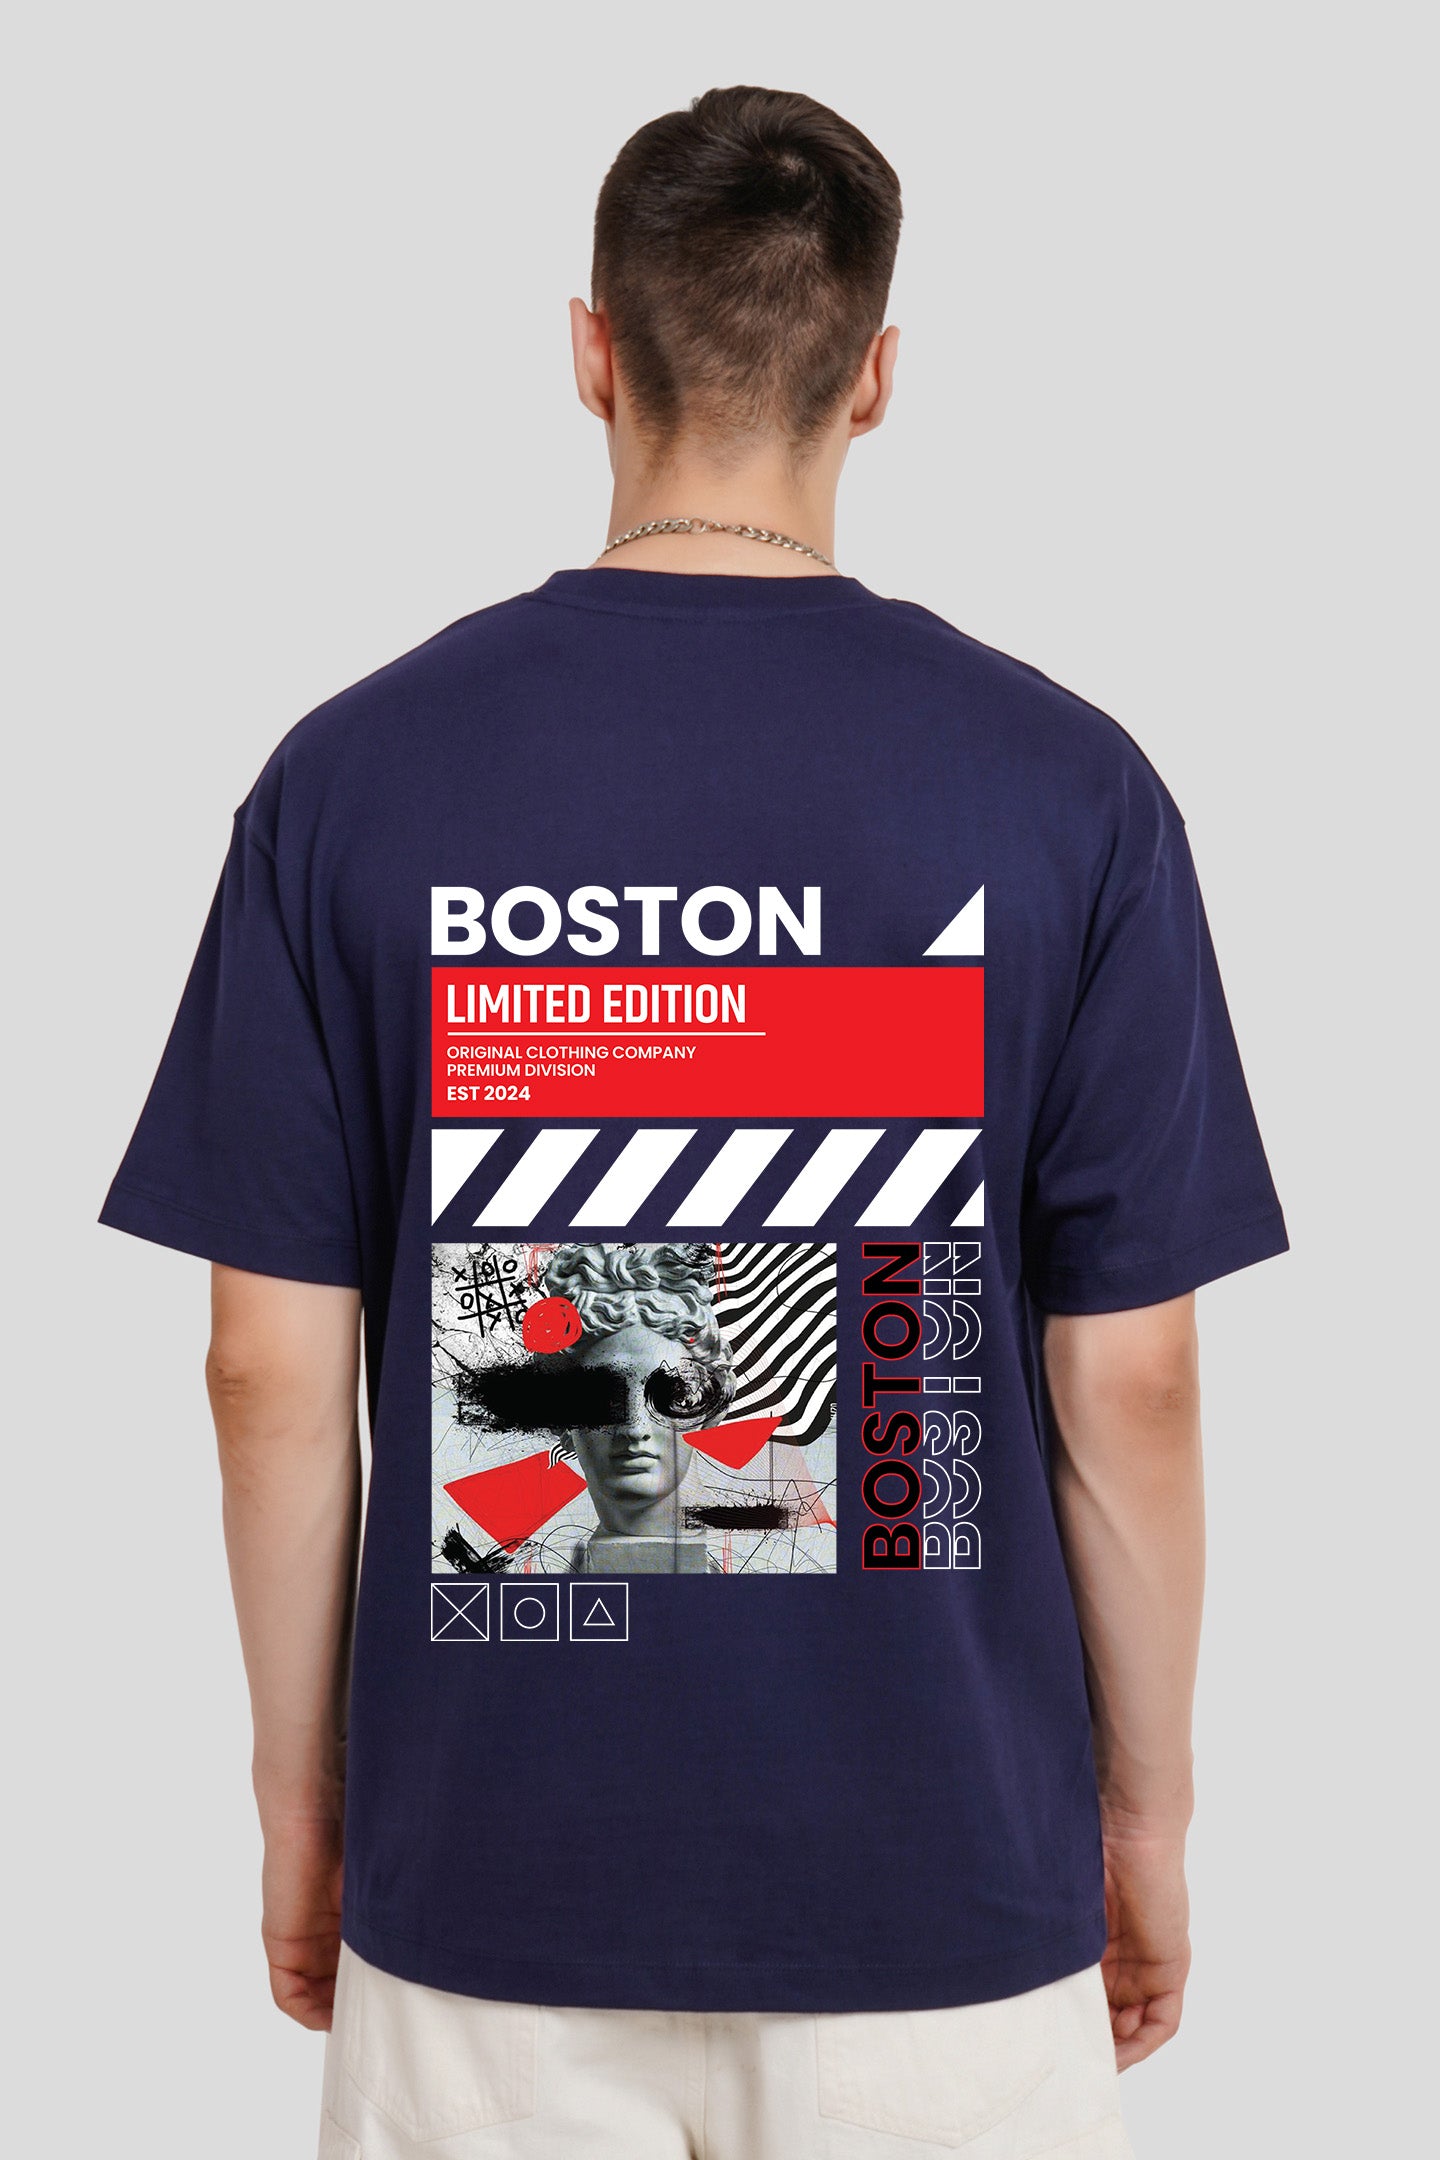 Boston Navy Blue Printed T Shirt Men Oversized Fit With Front And Back Design Pic 2